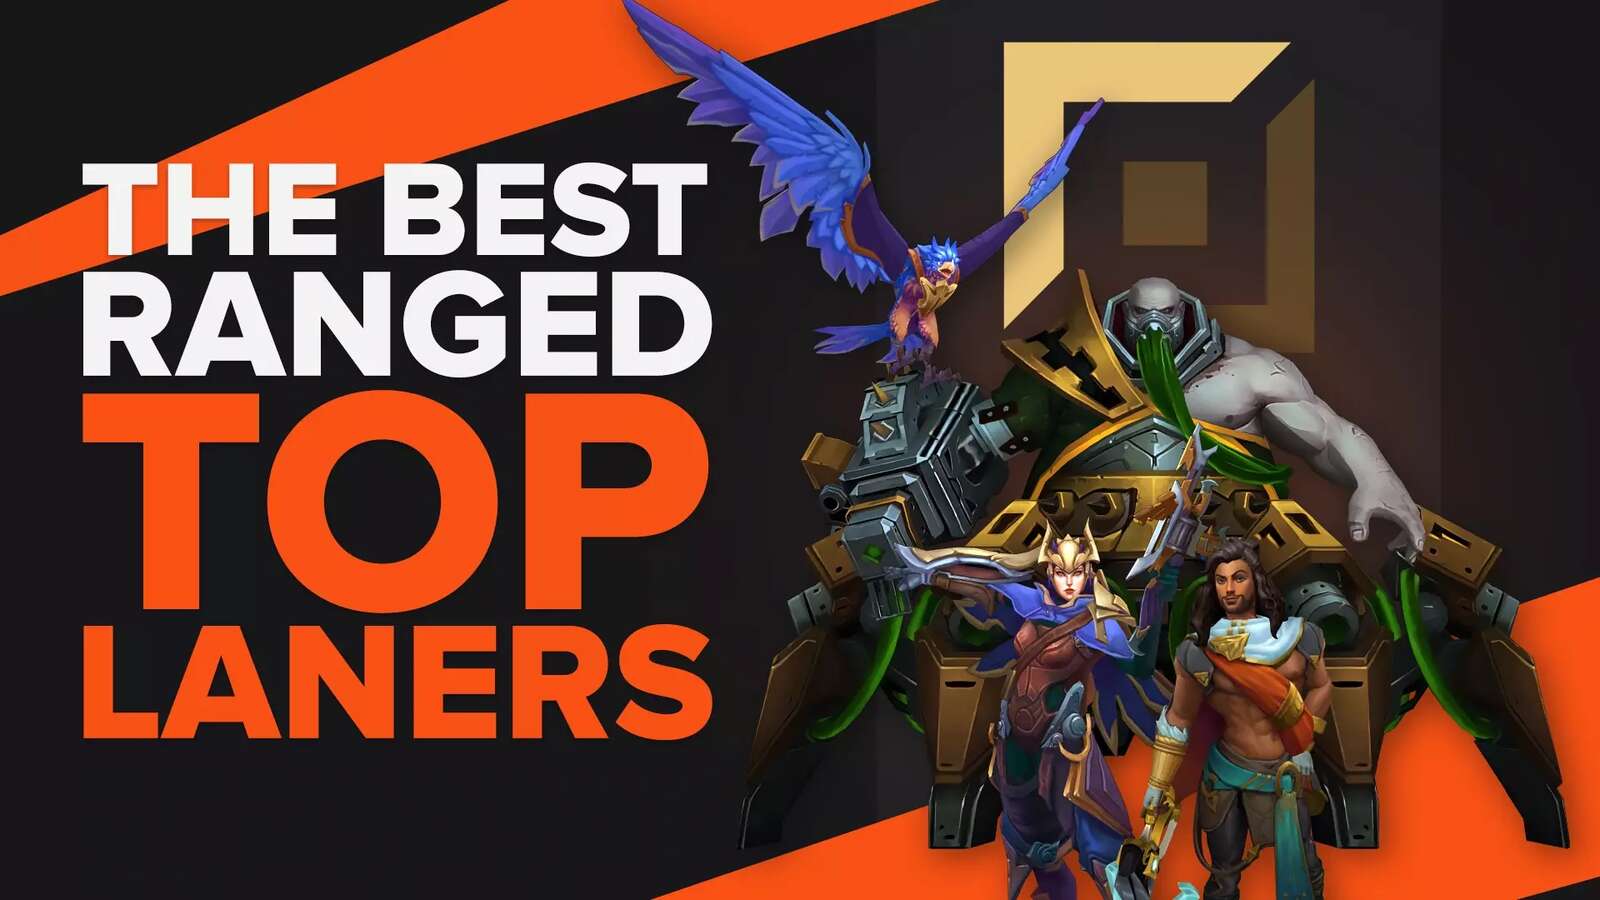 8 Best Ranged Top Laners to Play in LoL